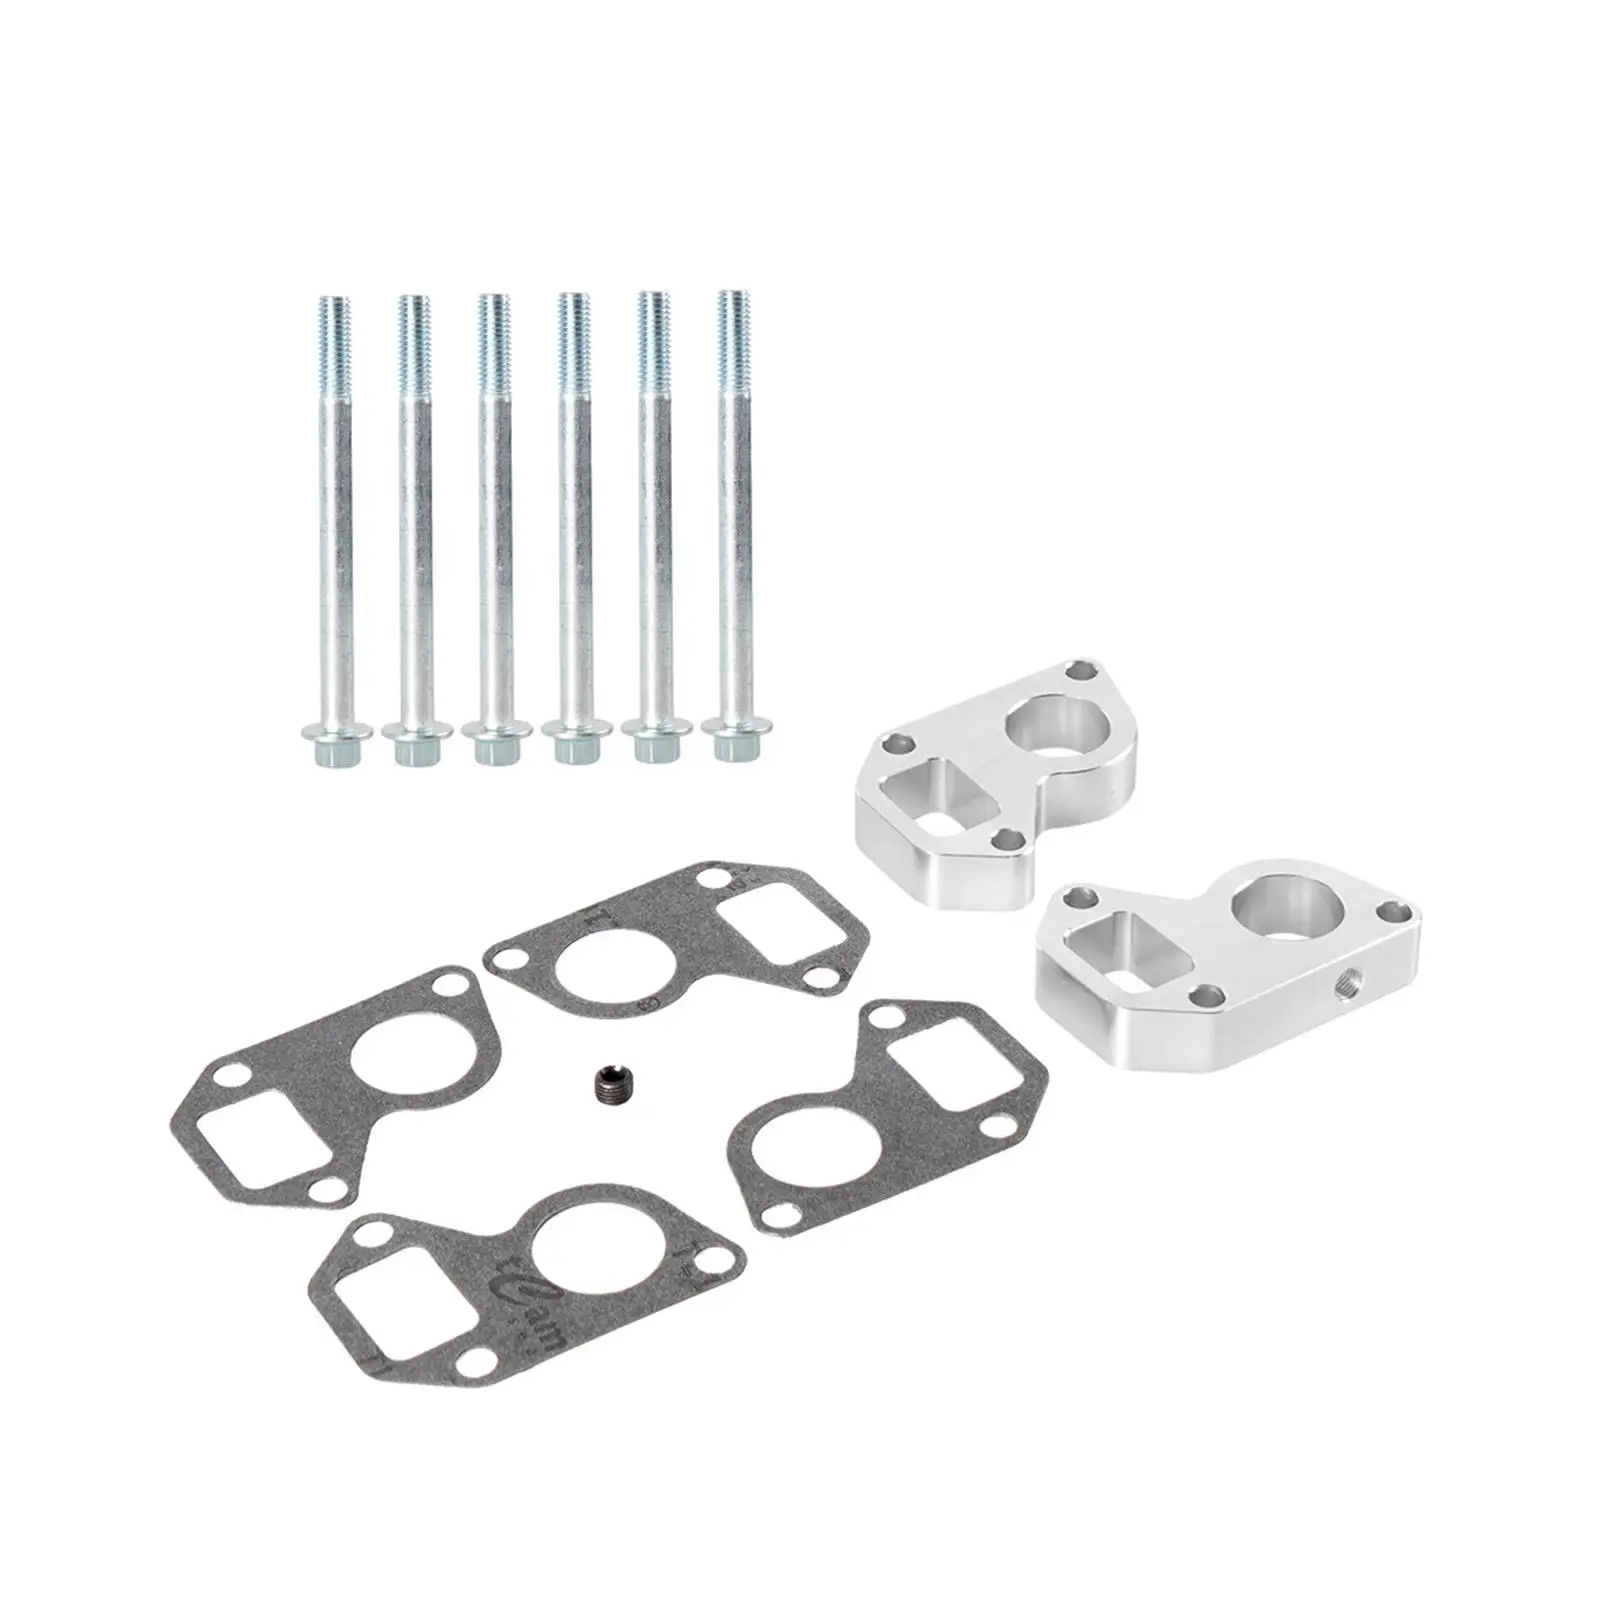 Water Pump Spacer Adapter Swap Kit Assembly Direct Replaces LS Water Pump Spacers Kit Accessory for Camaro LS1 to Truck LSX